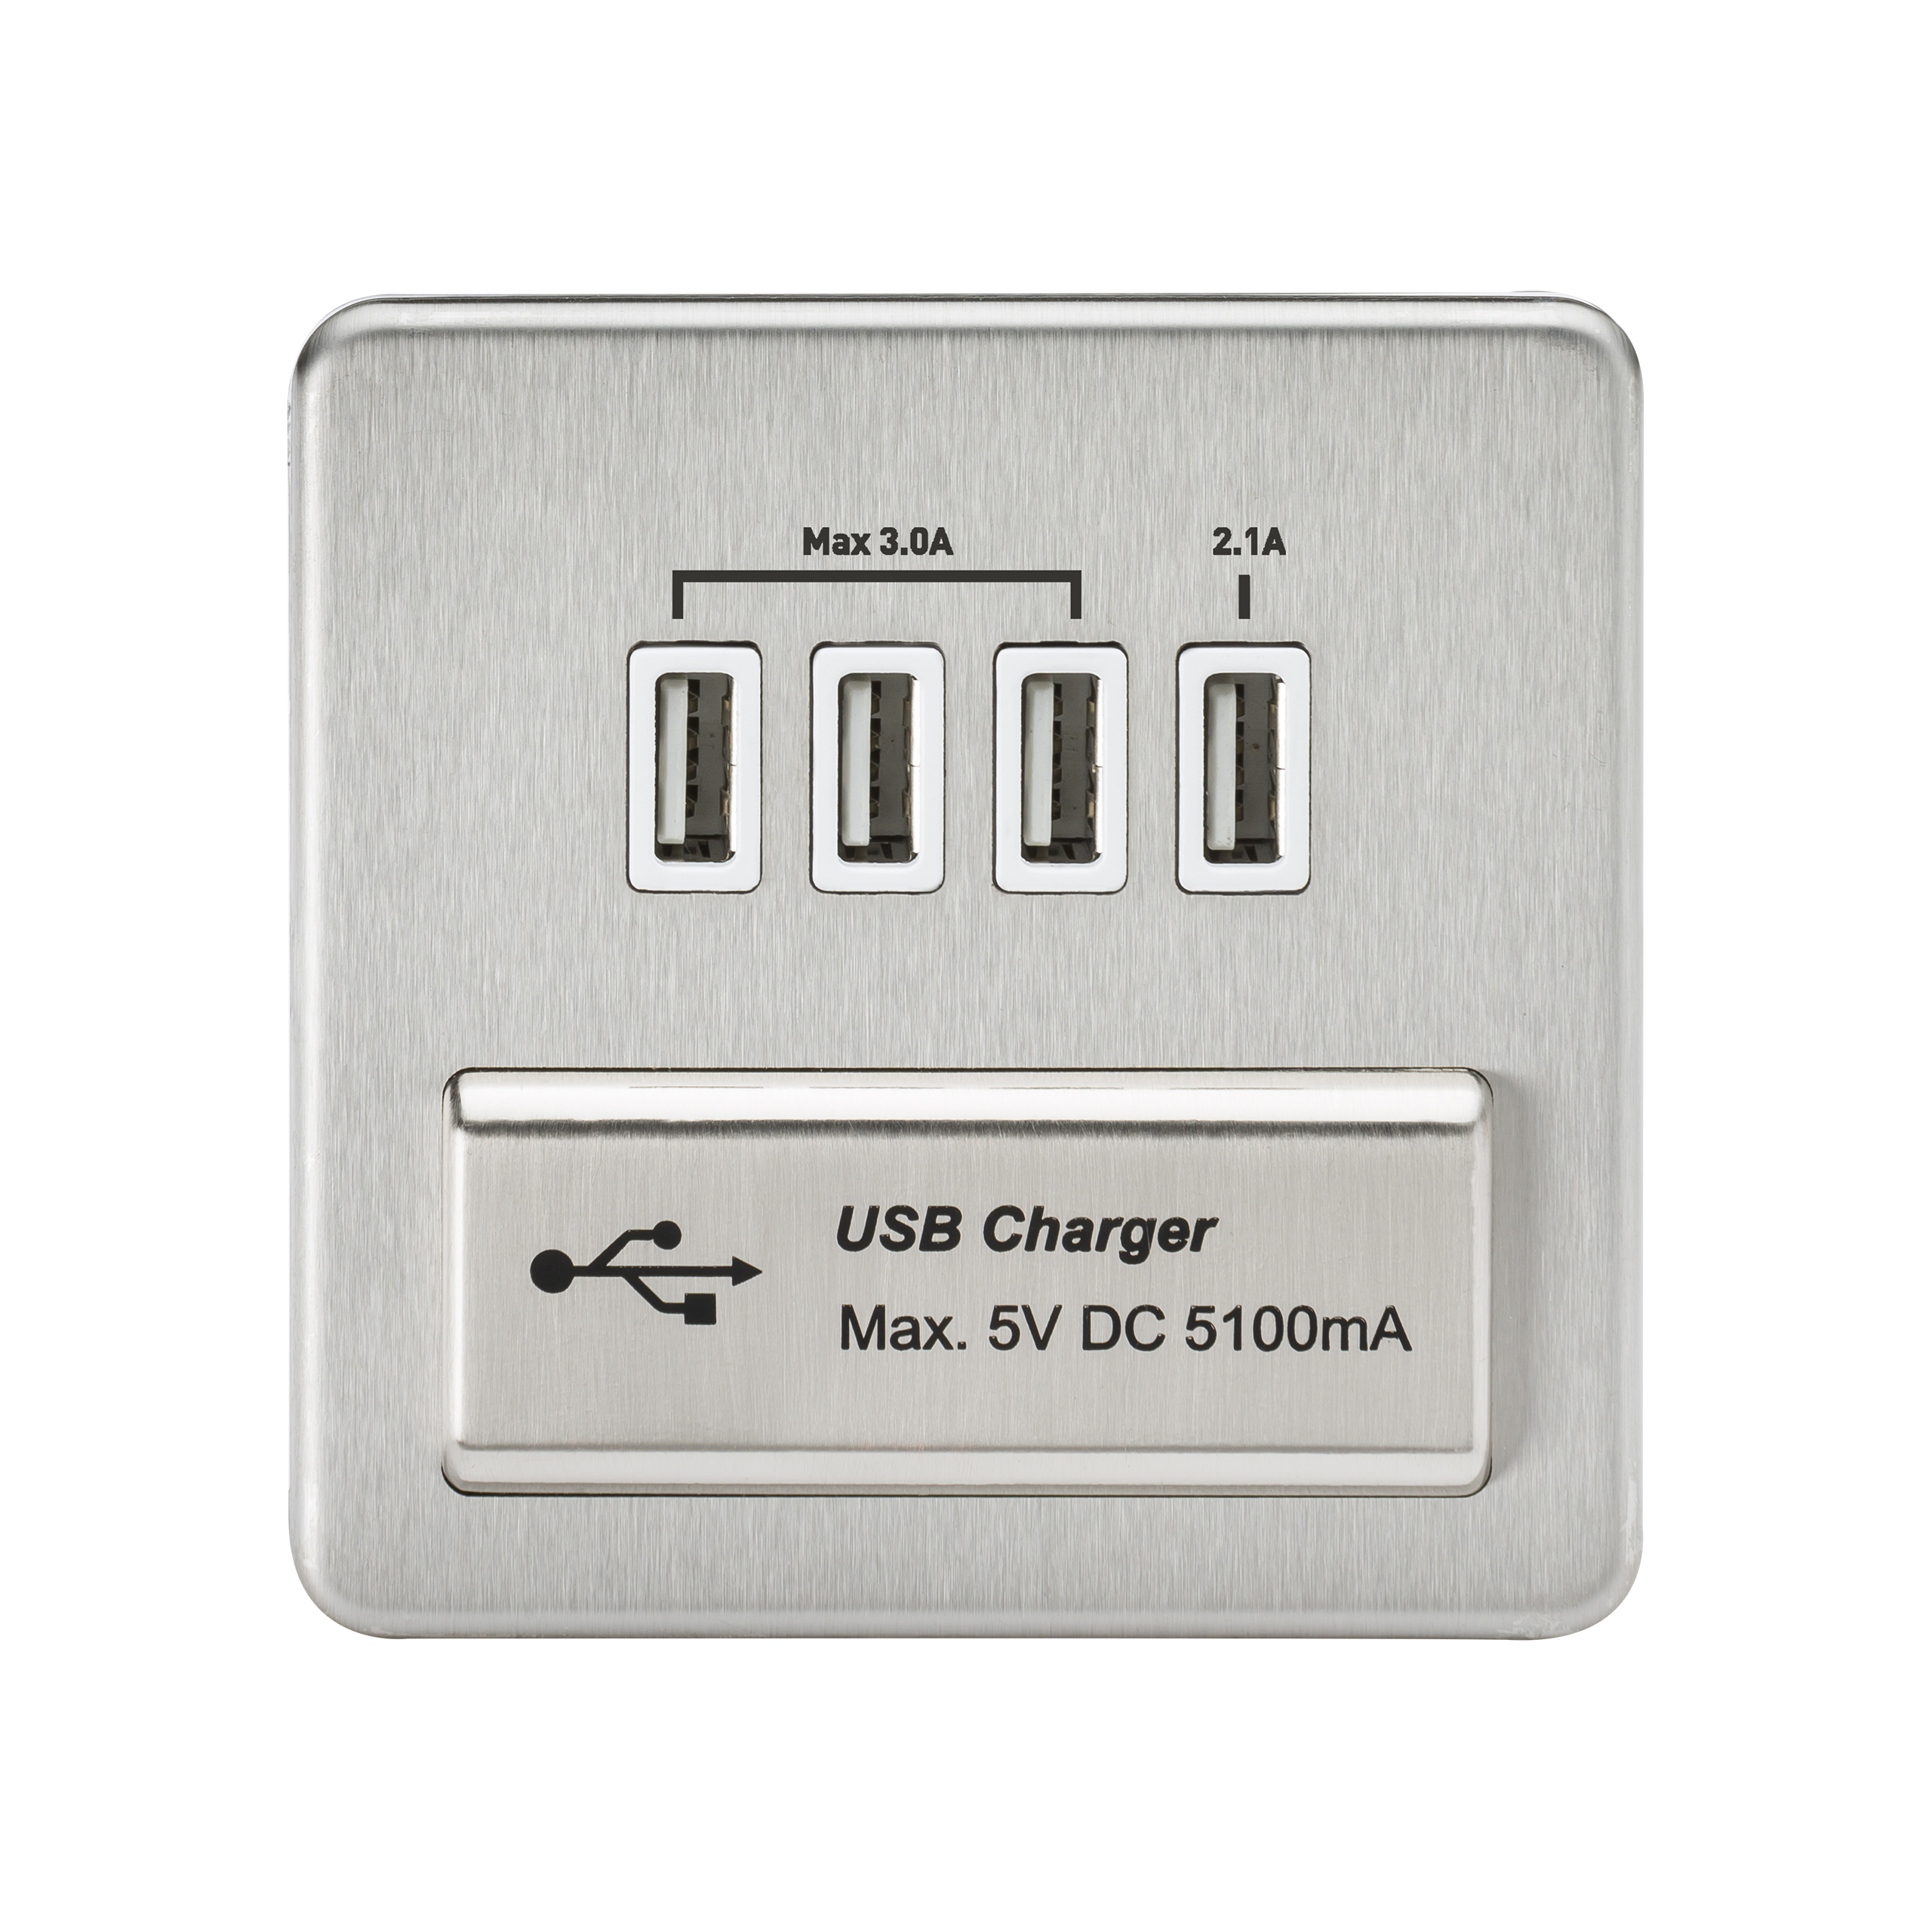 Screwless Quad USB Charger Outlet (5.1A) - Brushed Chrome With White Insert - SFQUADBCW 